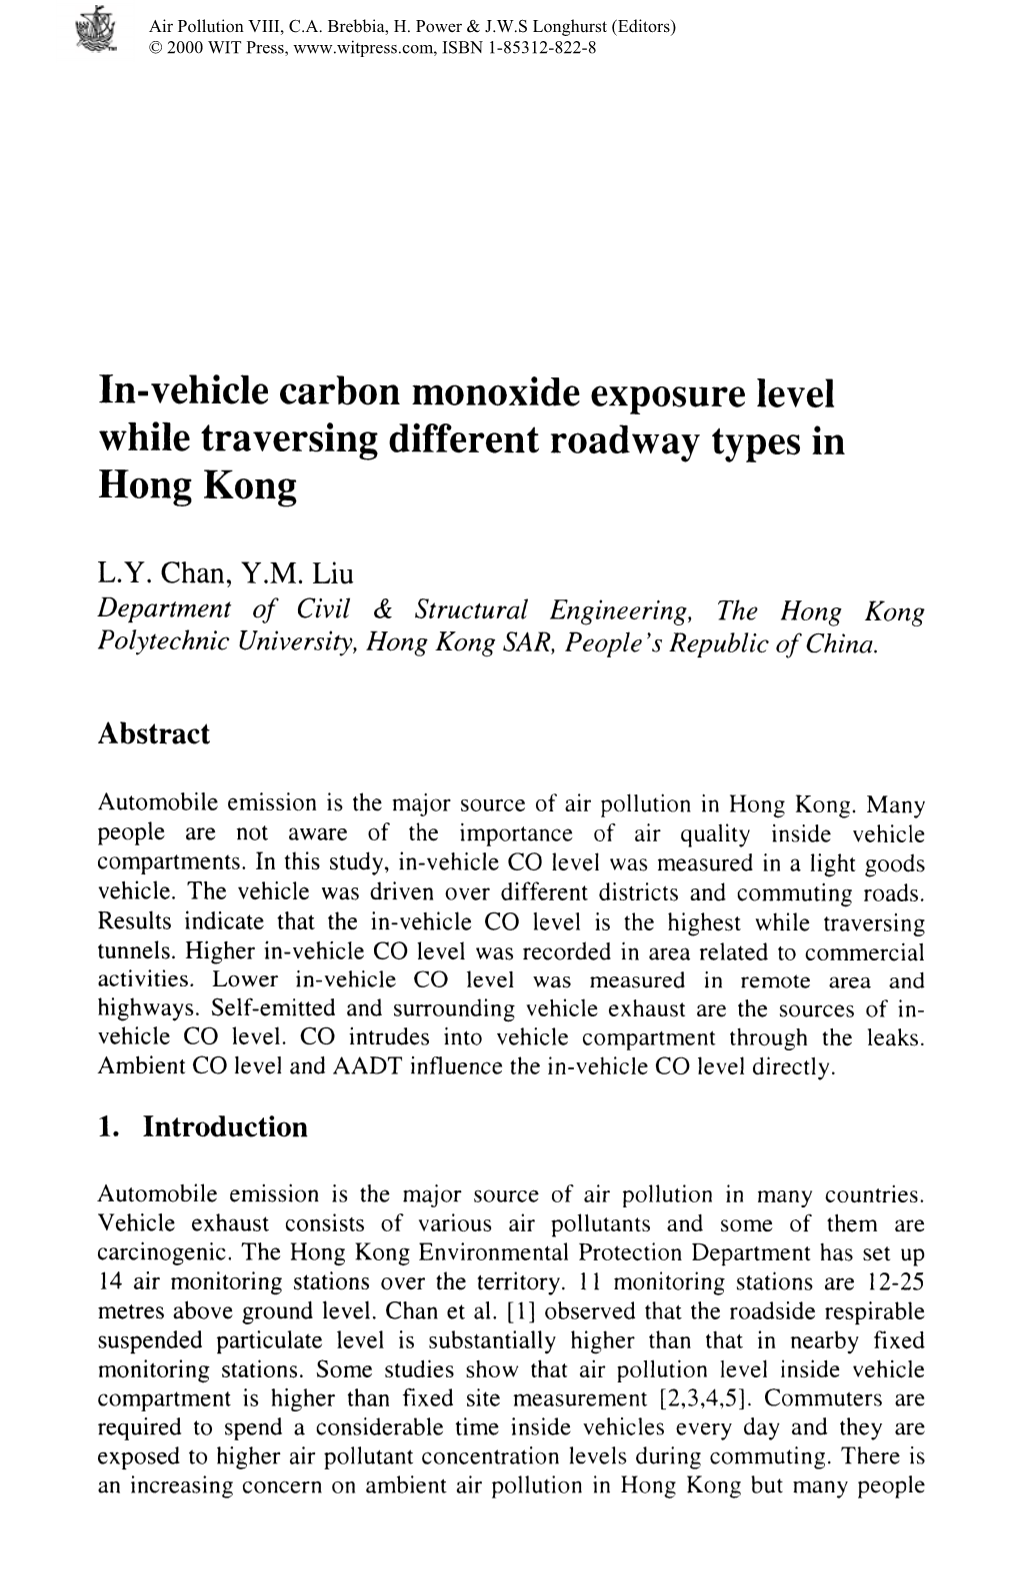 In-Vehicle Carbon Monoxide Exposure Level While Traversing Different Roadway Types in Hong Kong L.Y. Chan, Y.M. Liu Department O